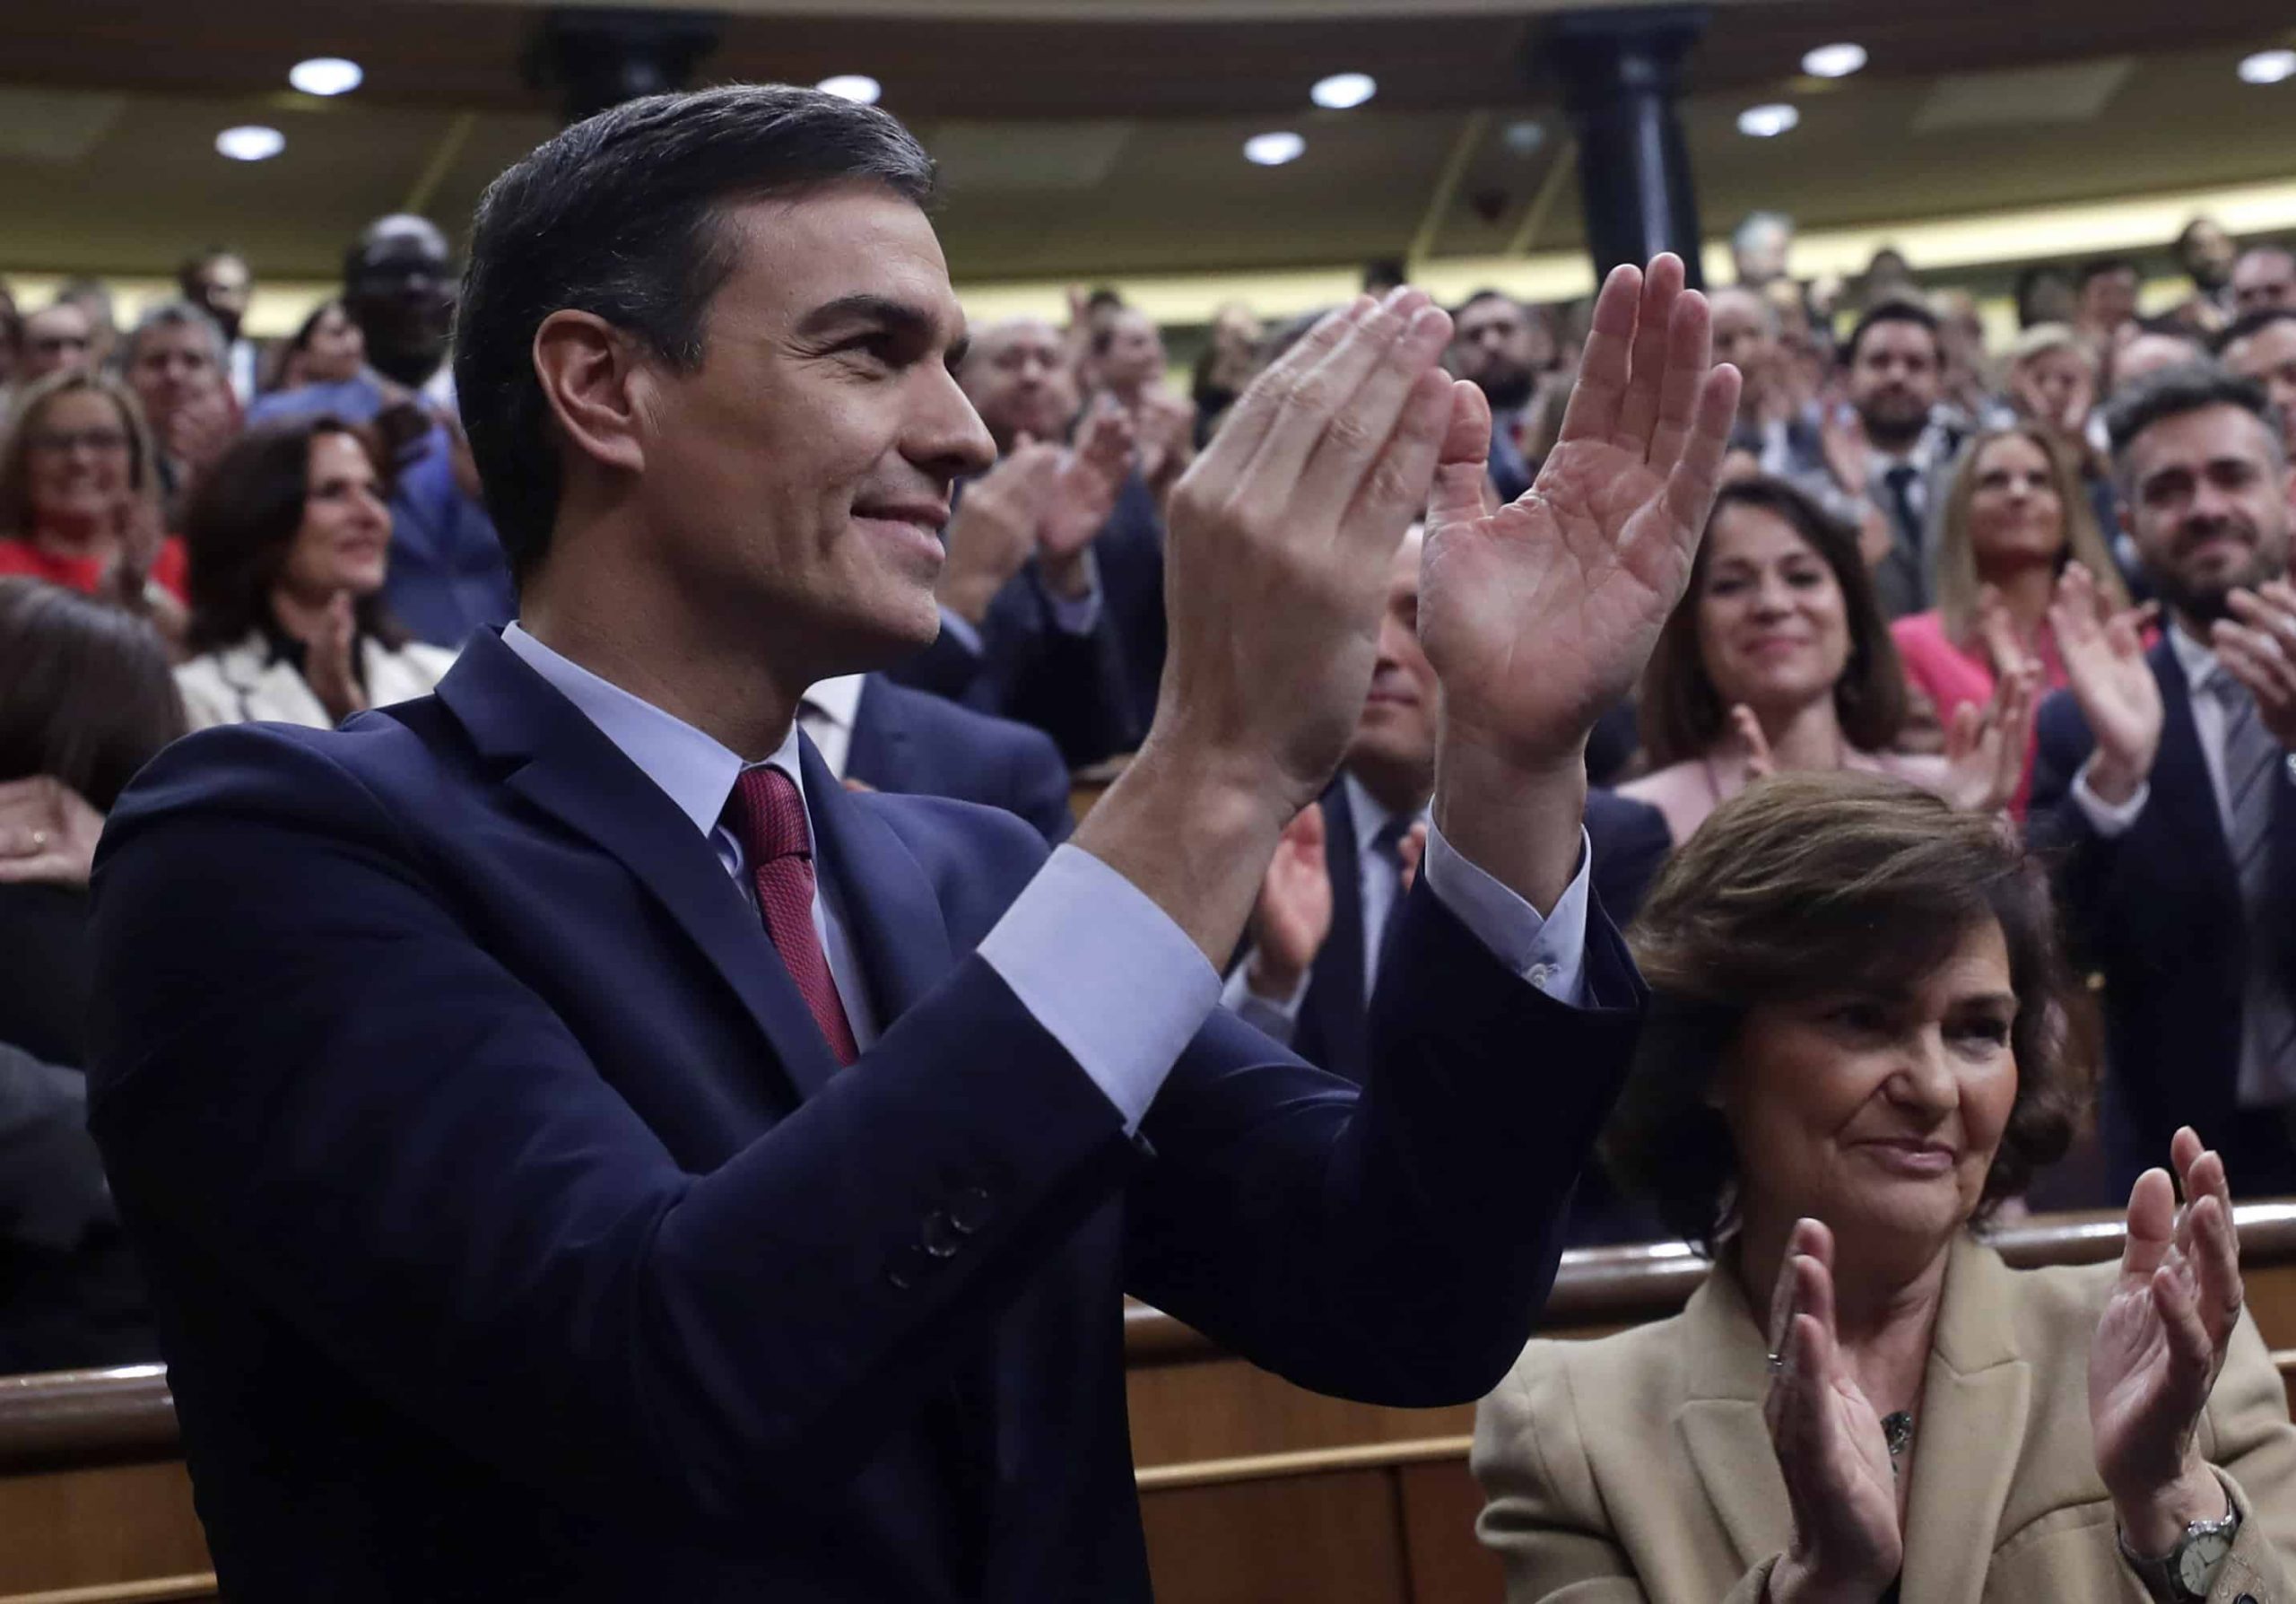 Socialist leader forms new Spanish government